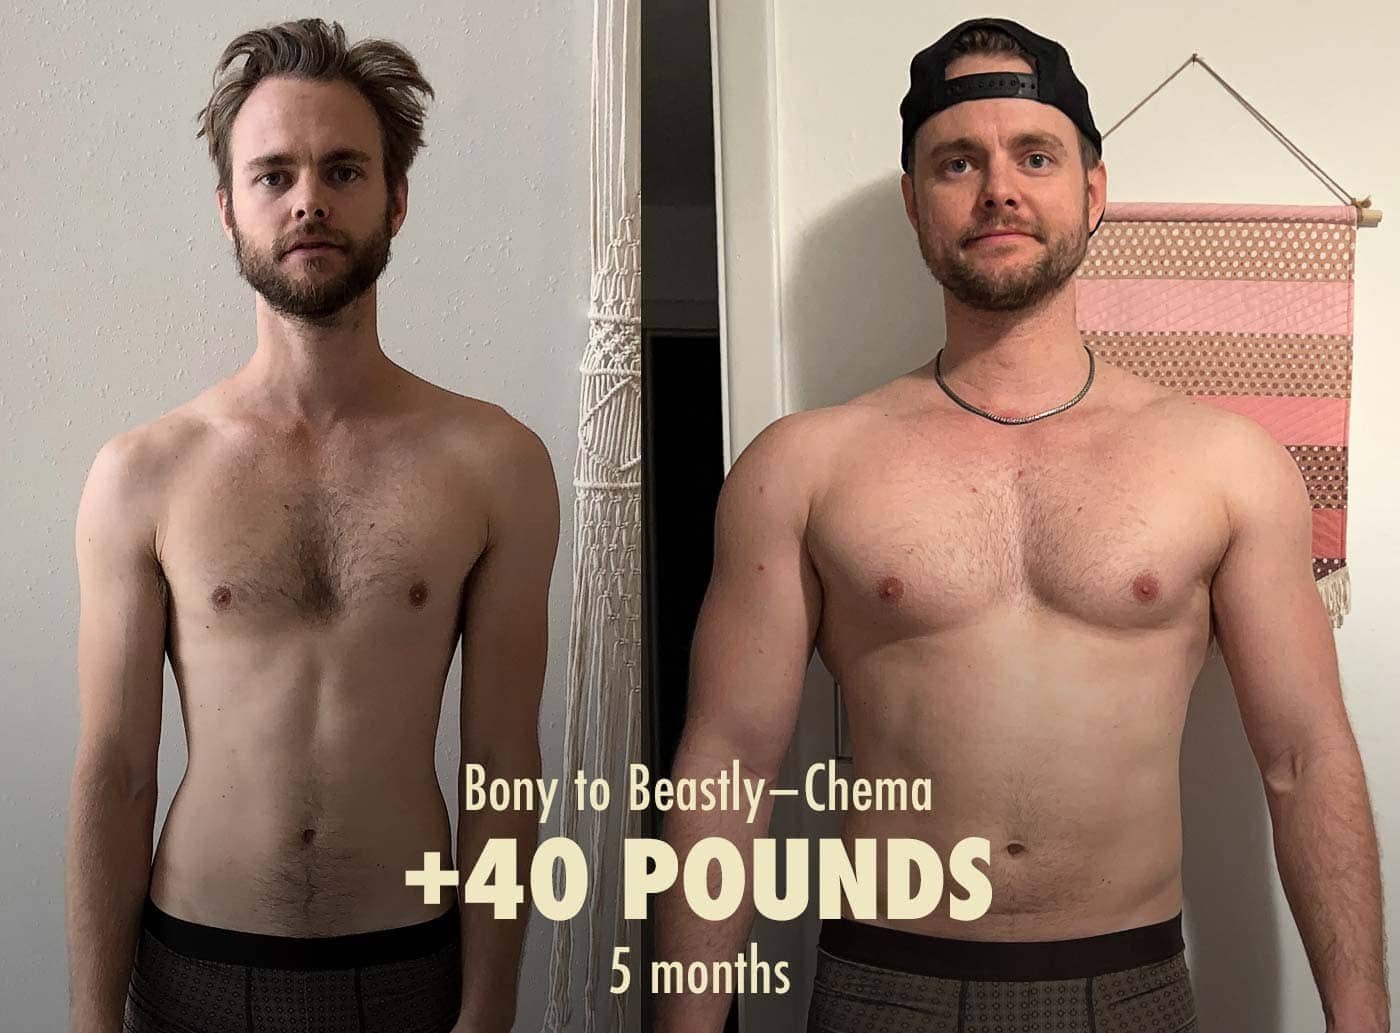 A before-and-after photo showing the results of a skinny guy bulking up and building muscle with the Macrofactor calorie tracking app.